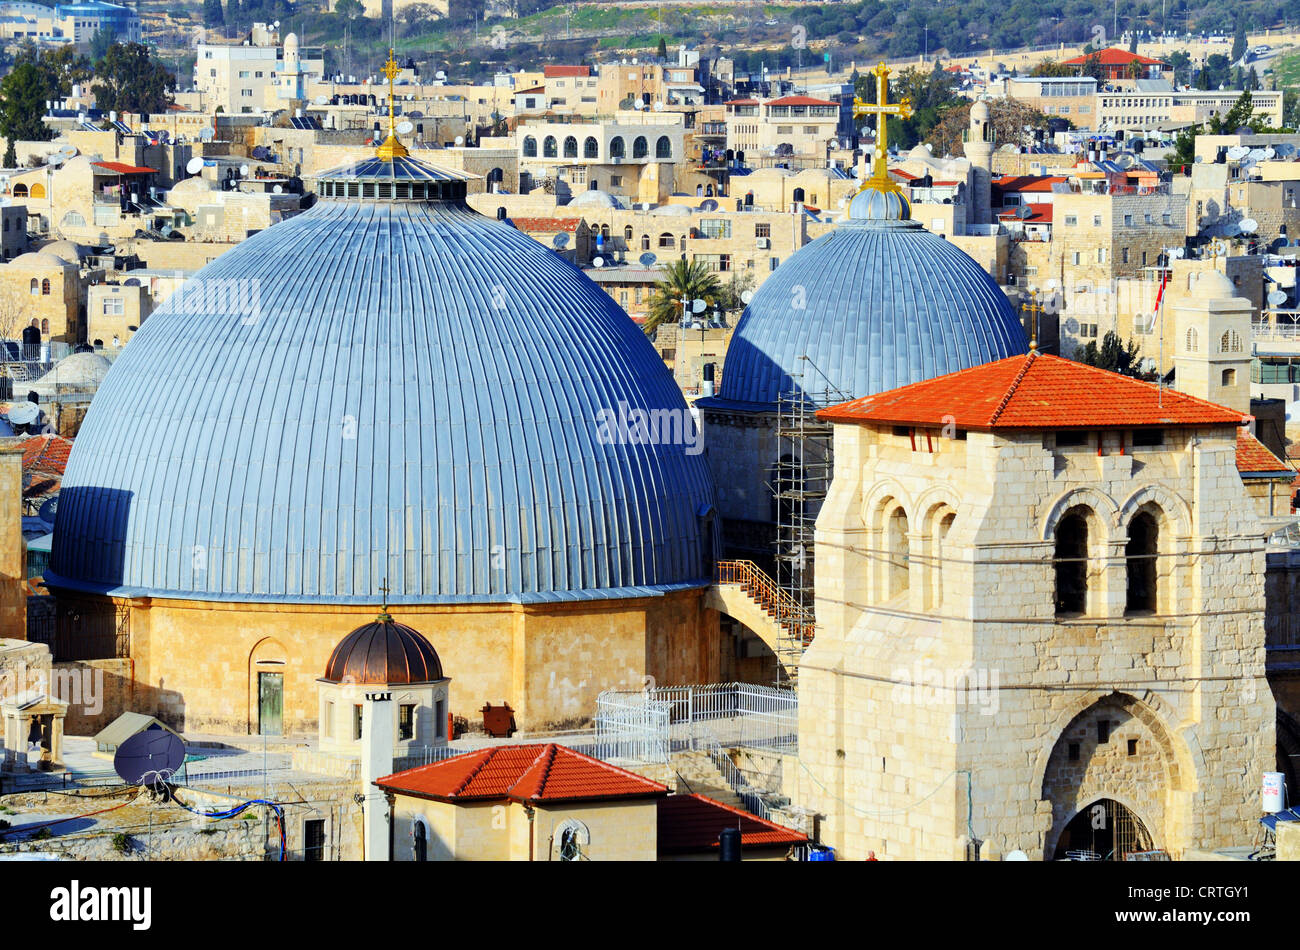 Dome cupola of the Church of the Holy Sepulchre in Jerusalem, Israel Stock Photo